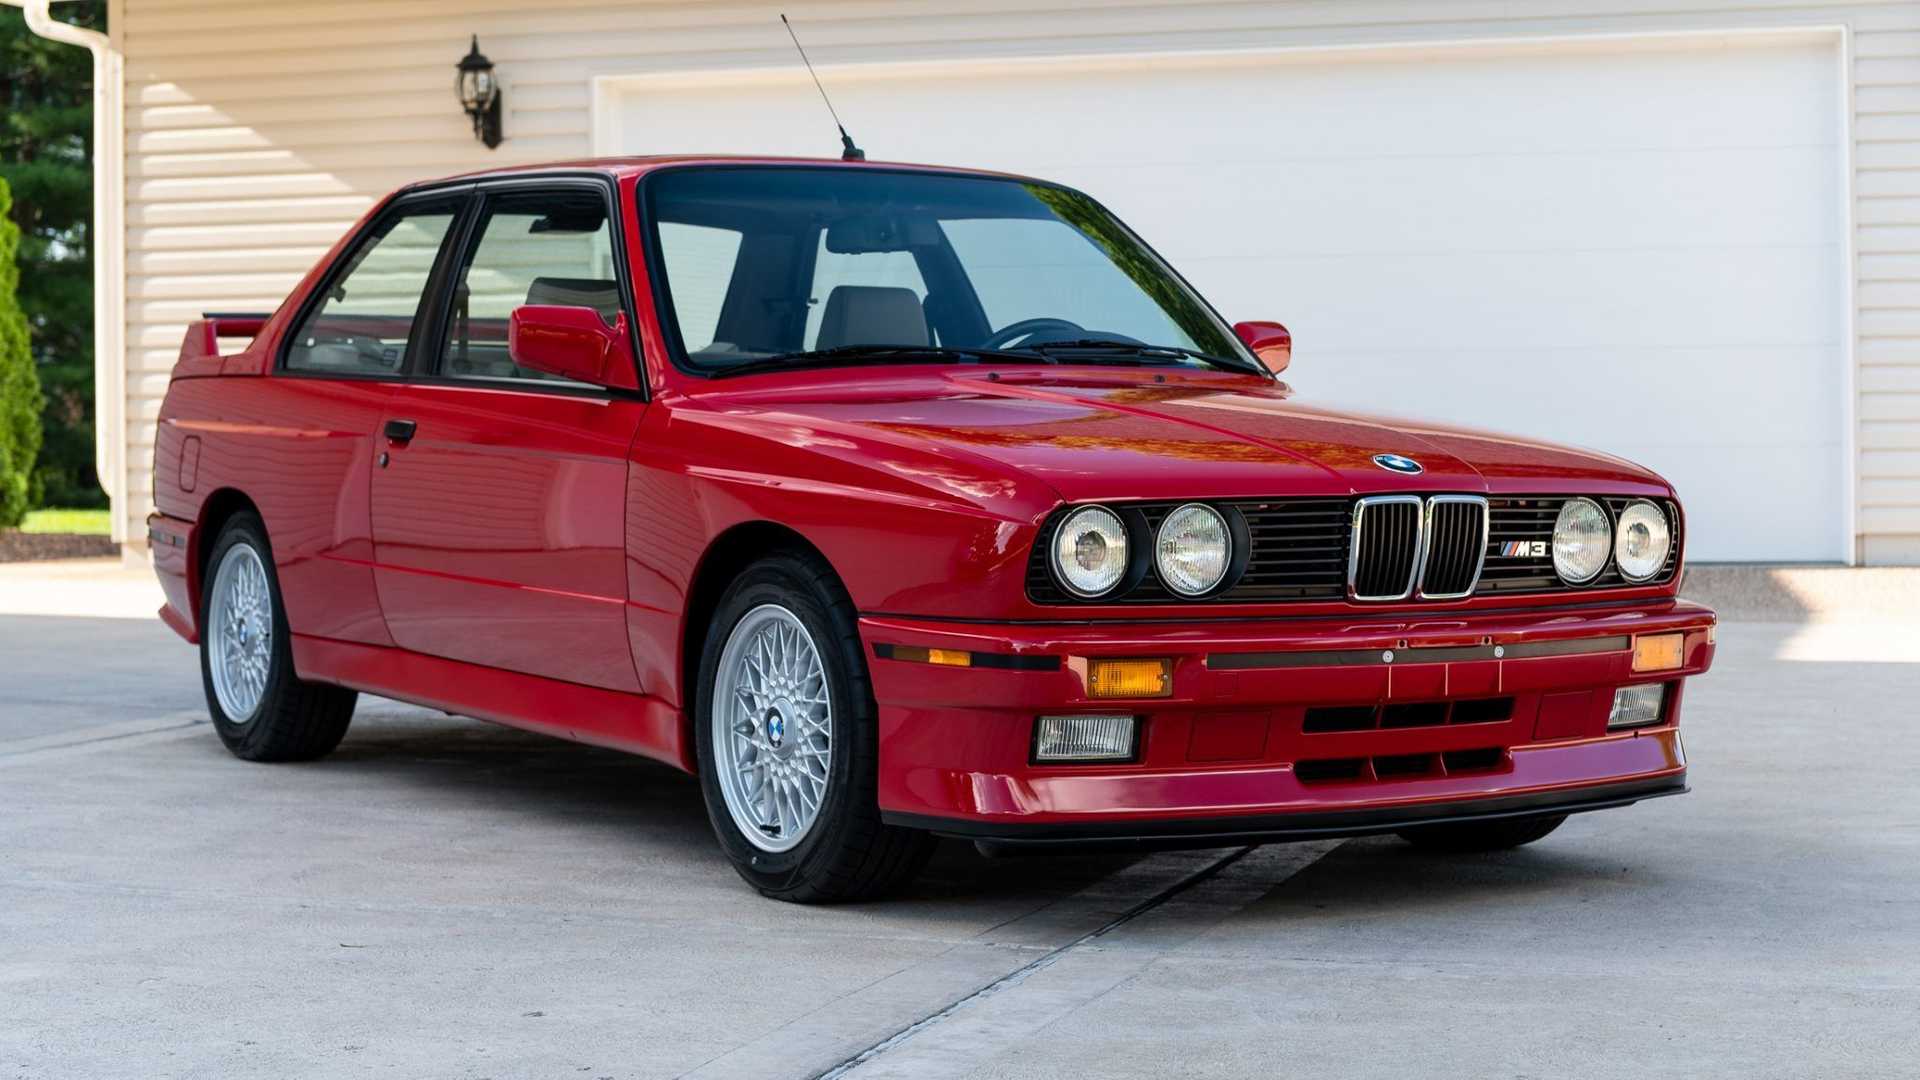 E30 BMW M3 Sold for Whopping $000 on Bring A